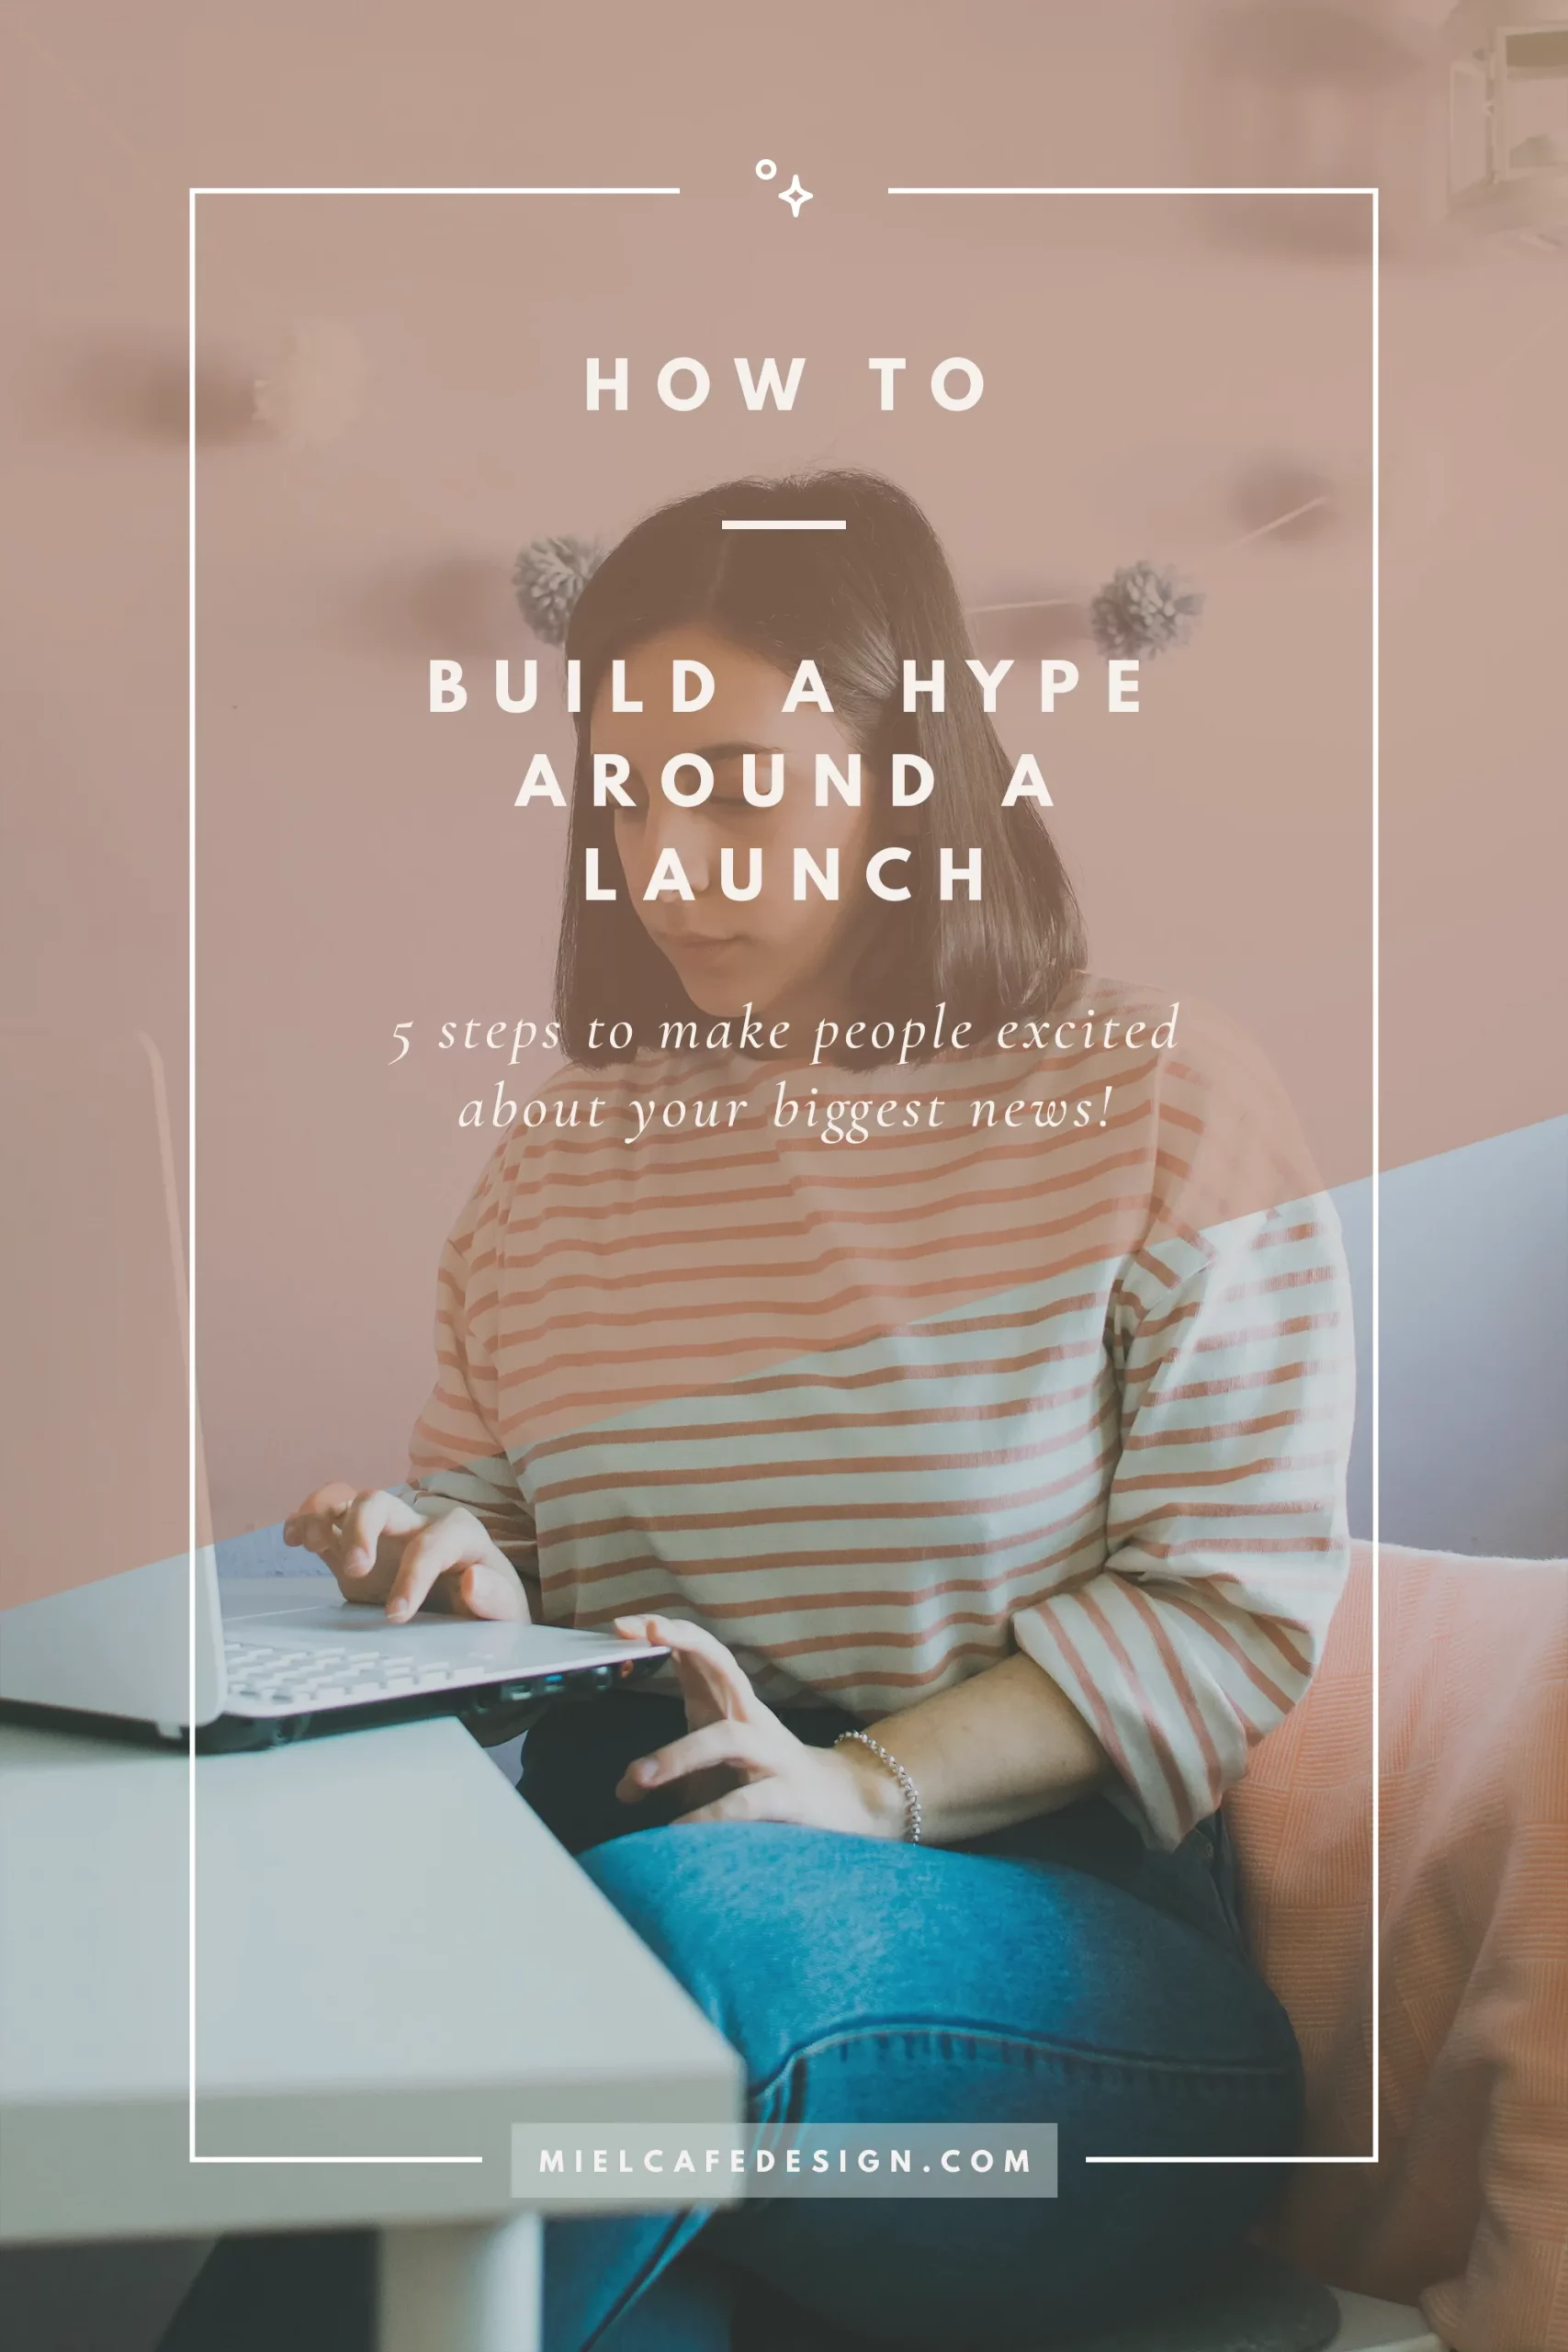 How to build a positive hype when launching a new business